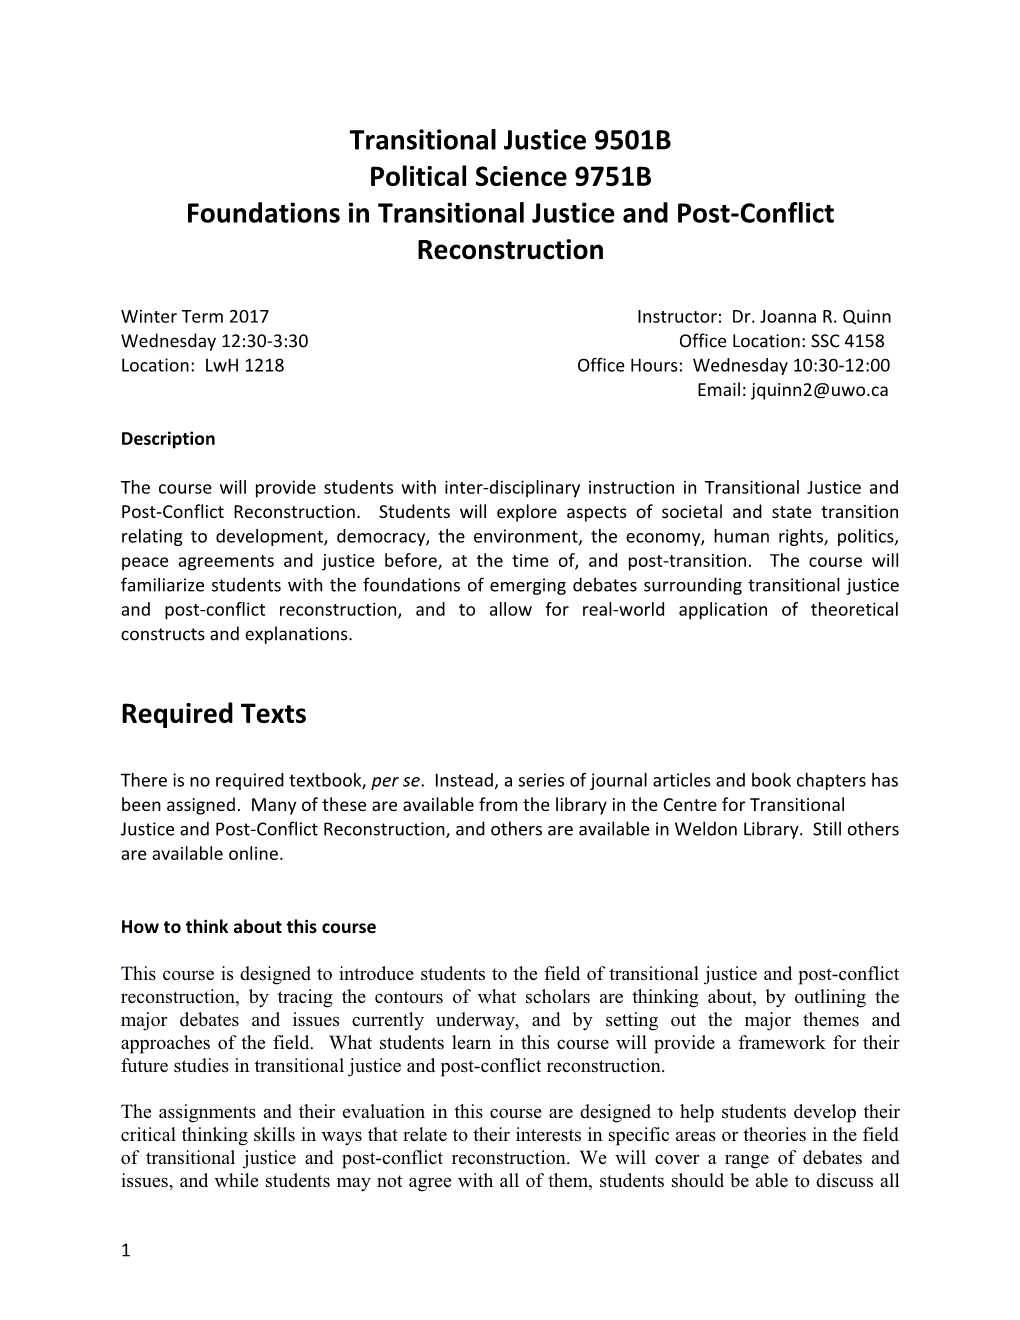 Foundations in Transitional Justice and Post-Conflict Reconstruction